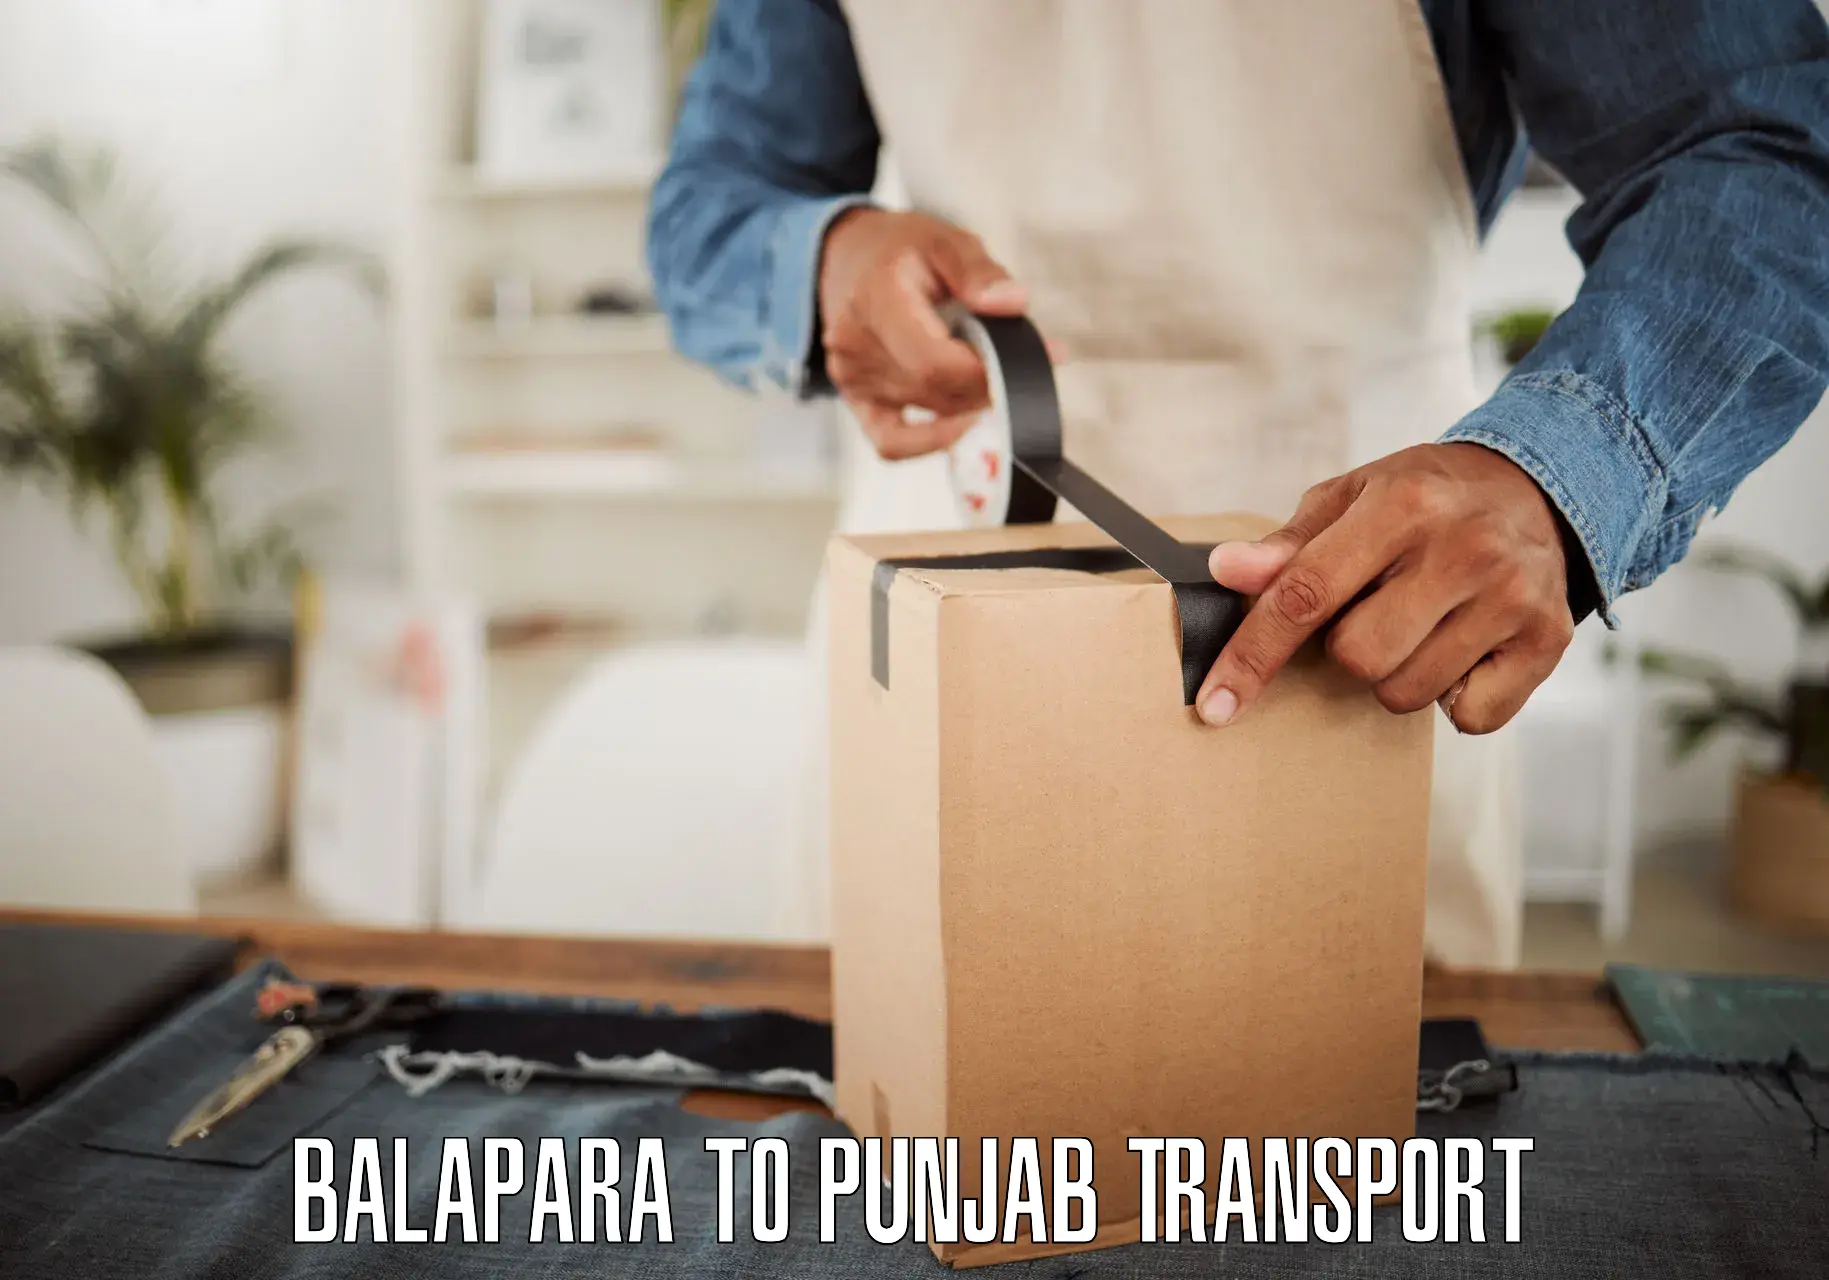 Transportation services Balapara to Sultanpur Lodhi